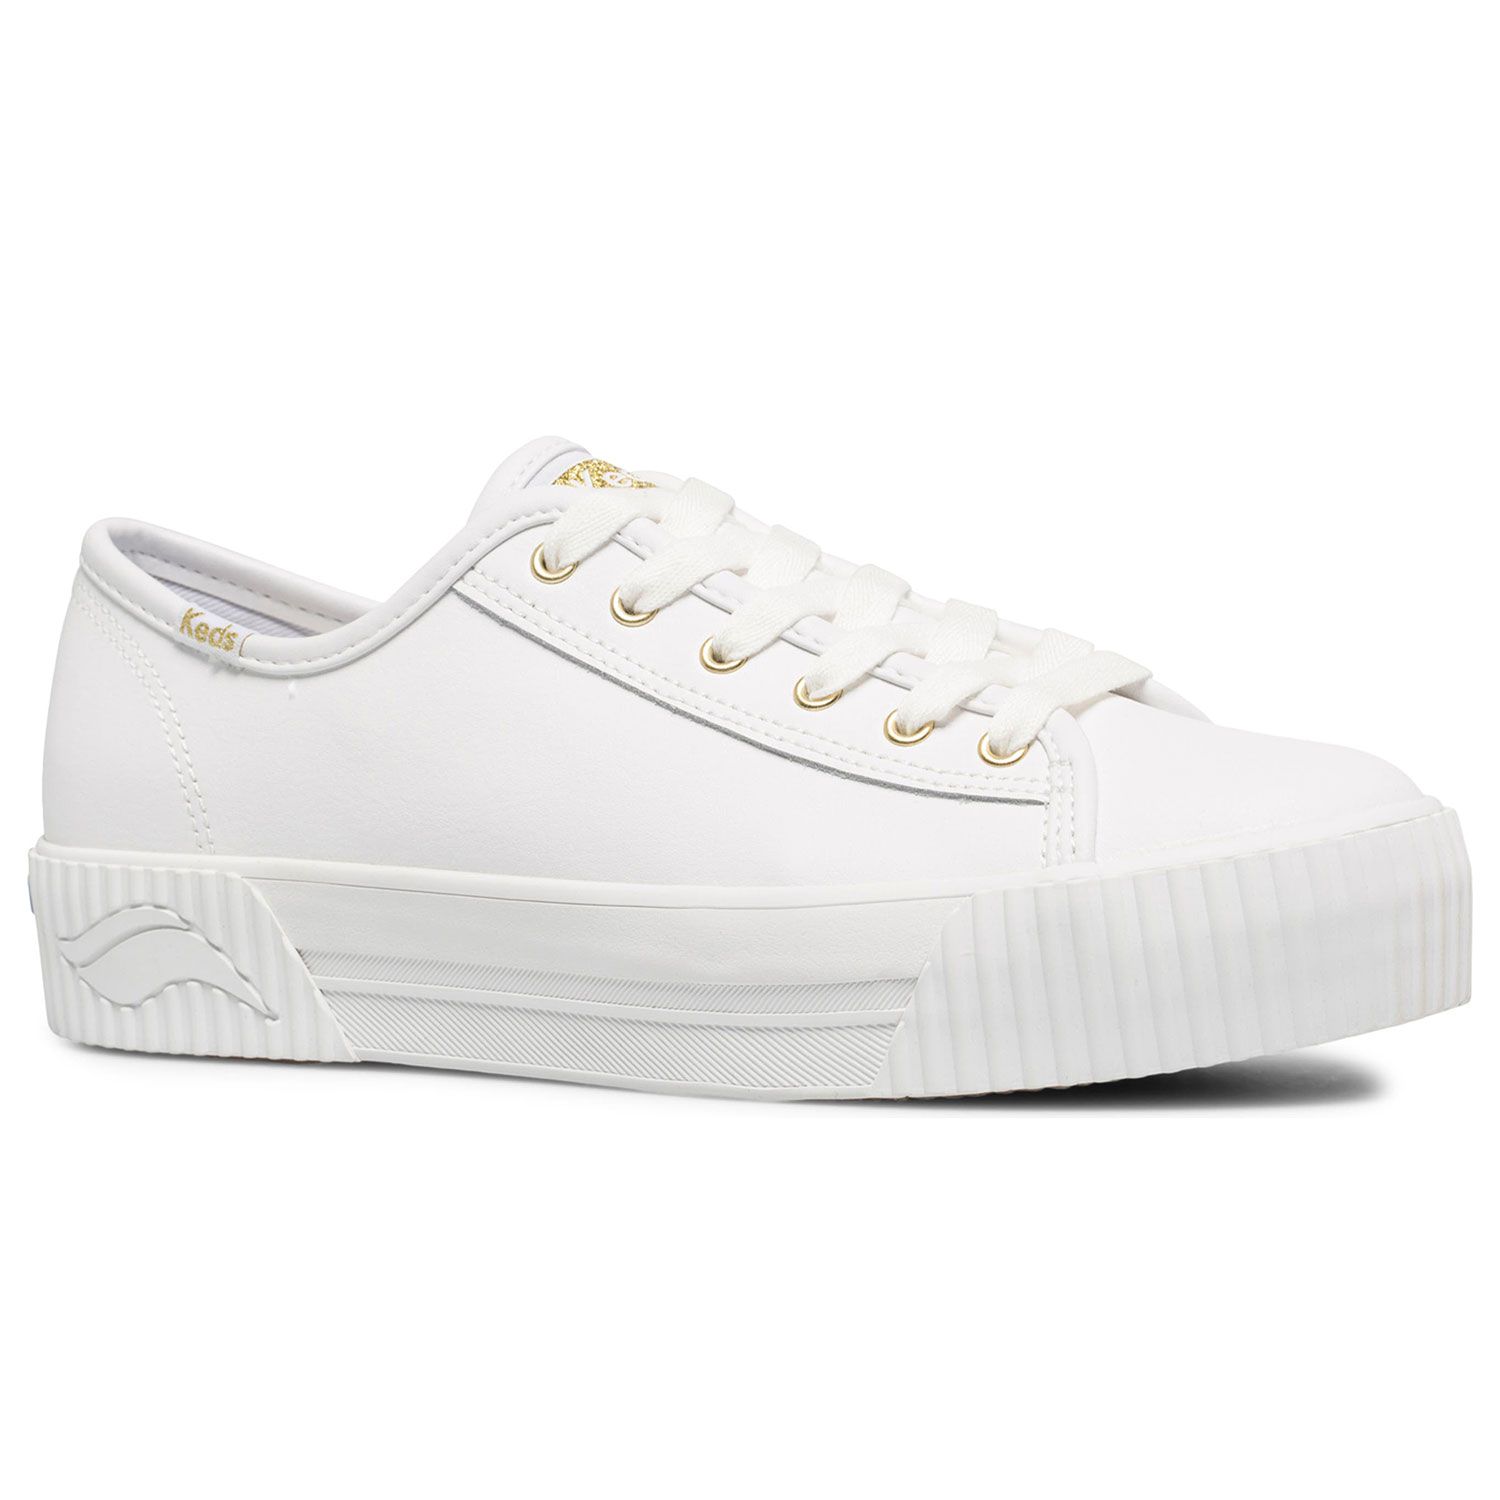 Nordstrom White Sneakers 2021